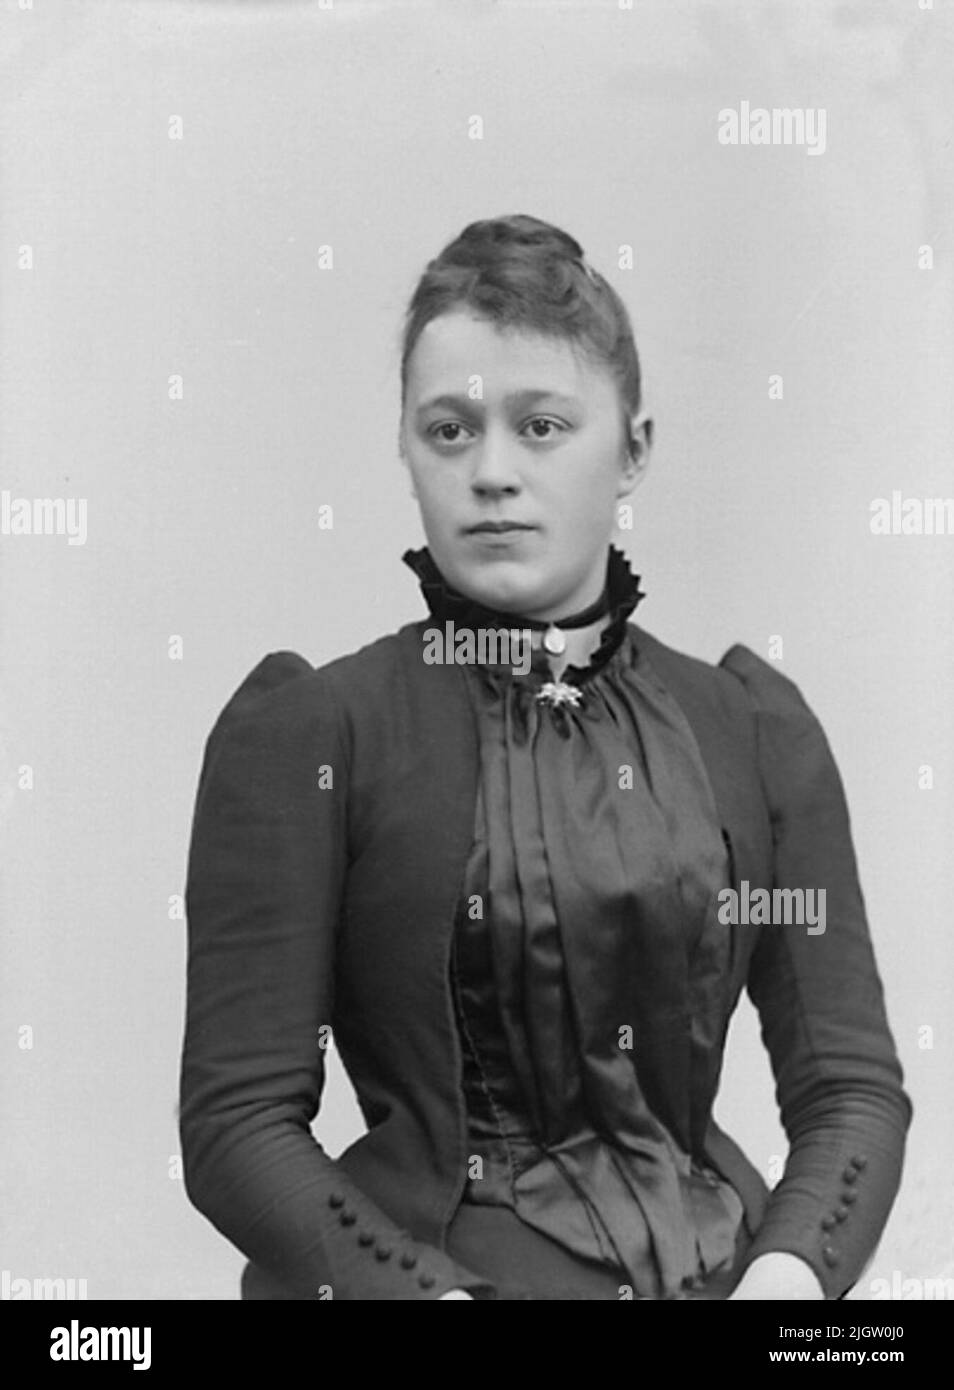 No. 215. Miss Elin Johansson, Trees, Ljungskile. 1894. Knee picture of a young lady in a black dress with a high collar. In the throat pit, a velvet band with medallion can be seen. Ateljéfoto. Stock Photo